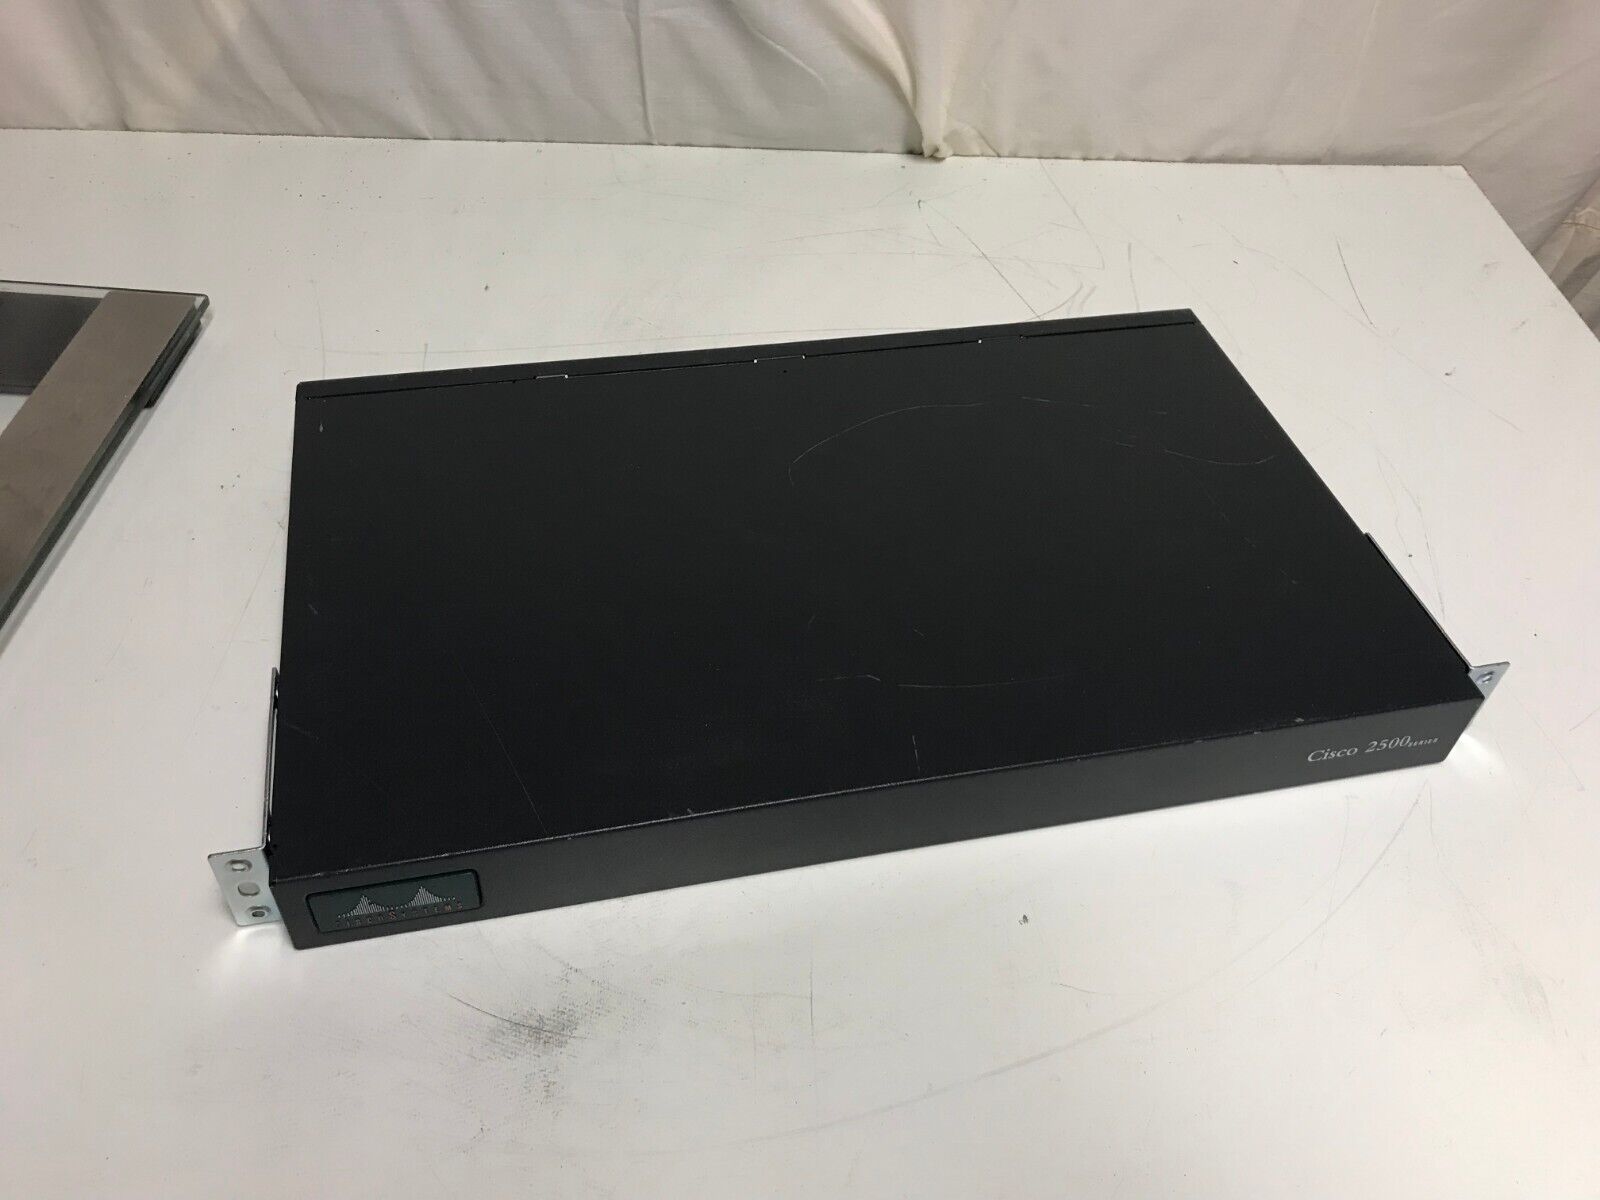 Cisco Systems 2500 Series Wired Network Switch Router Model 2501